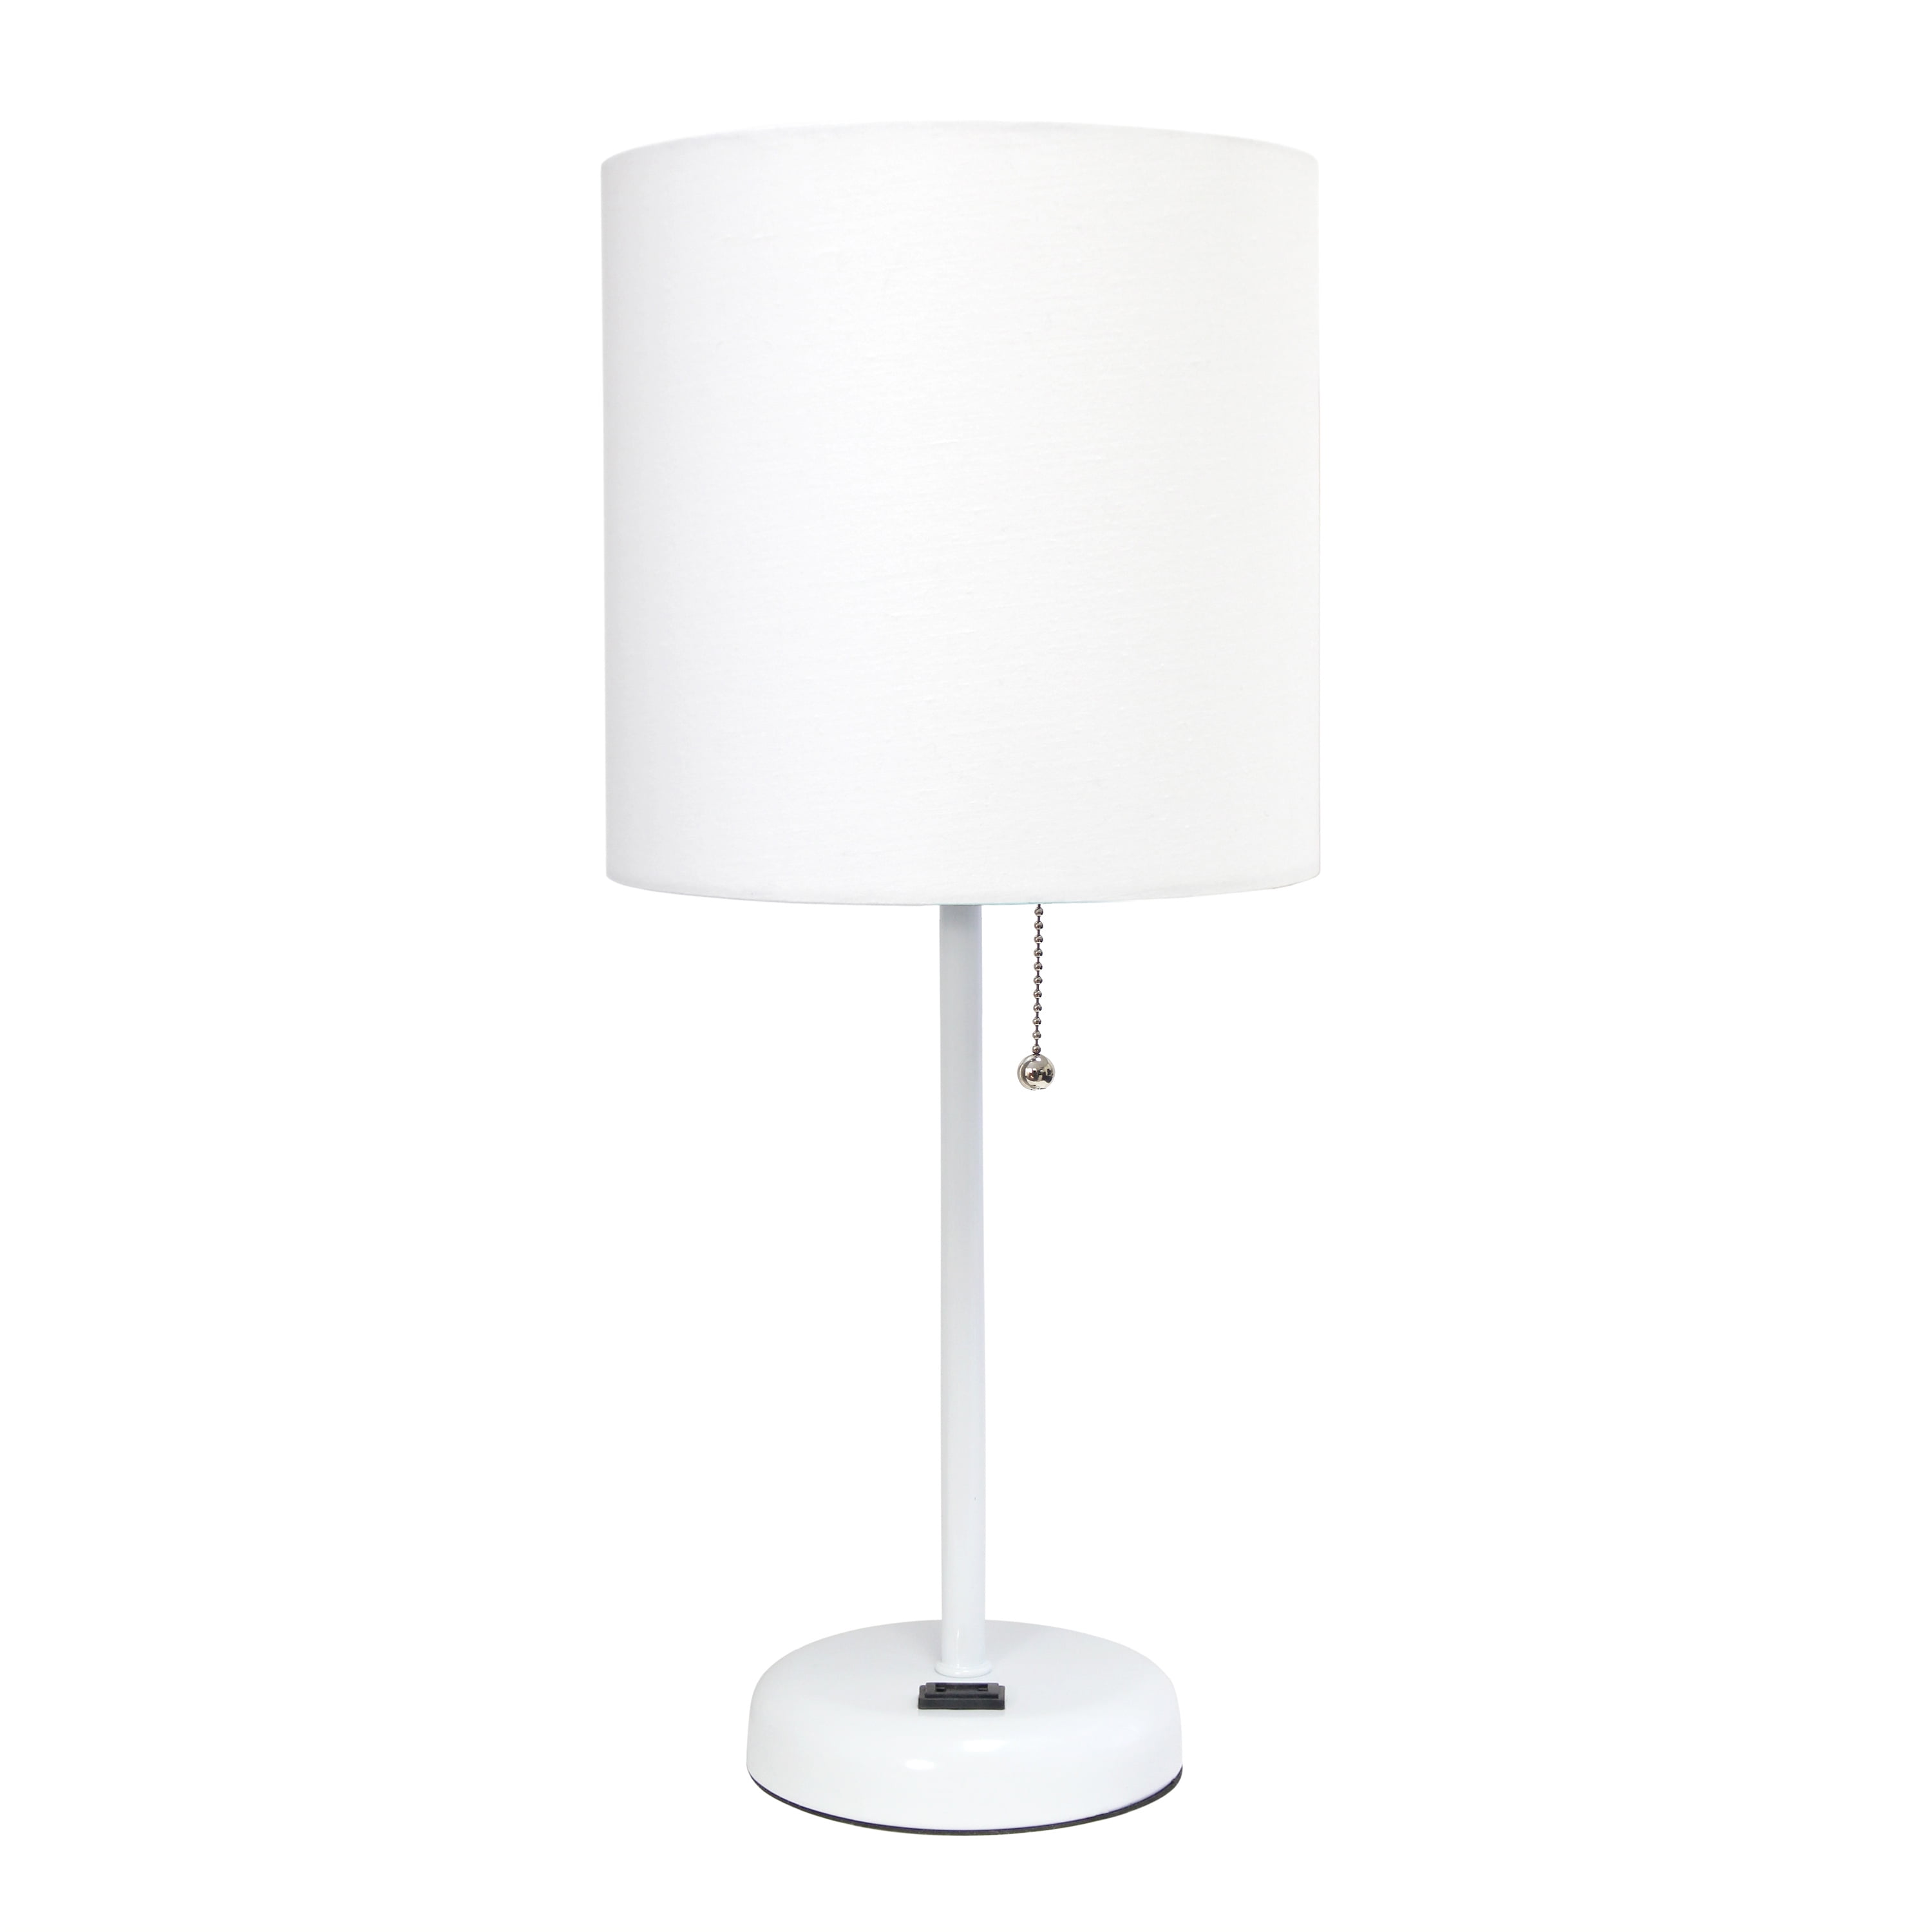 Lt2024-wow White Stick Table Lamp With Charging Outlet & Fabric Shade, White